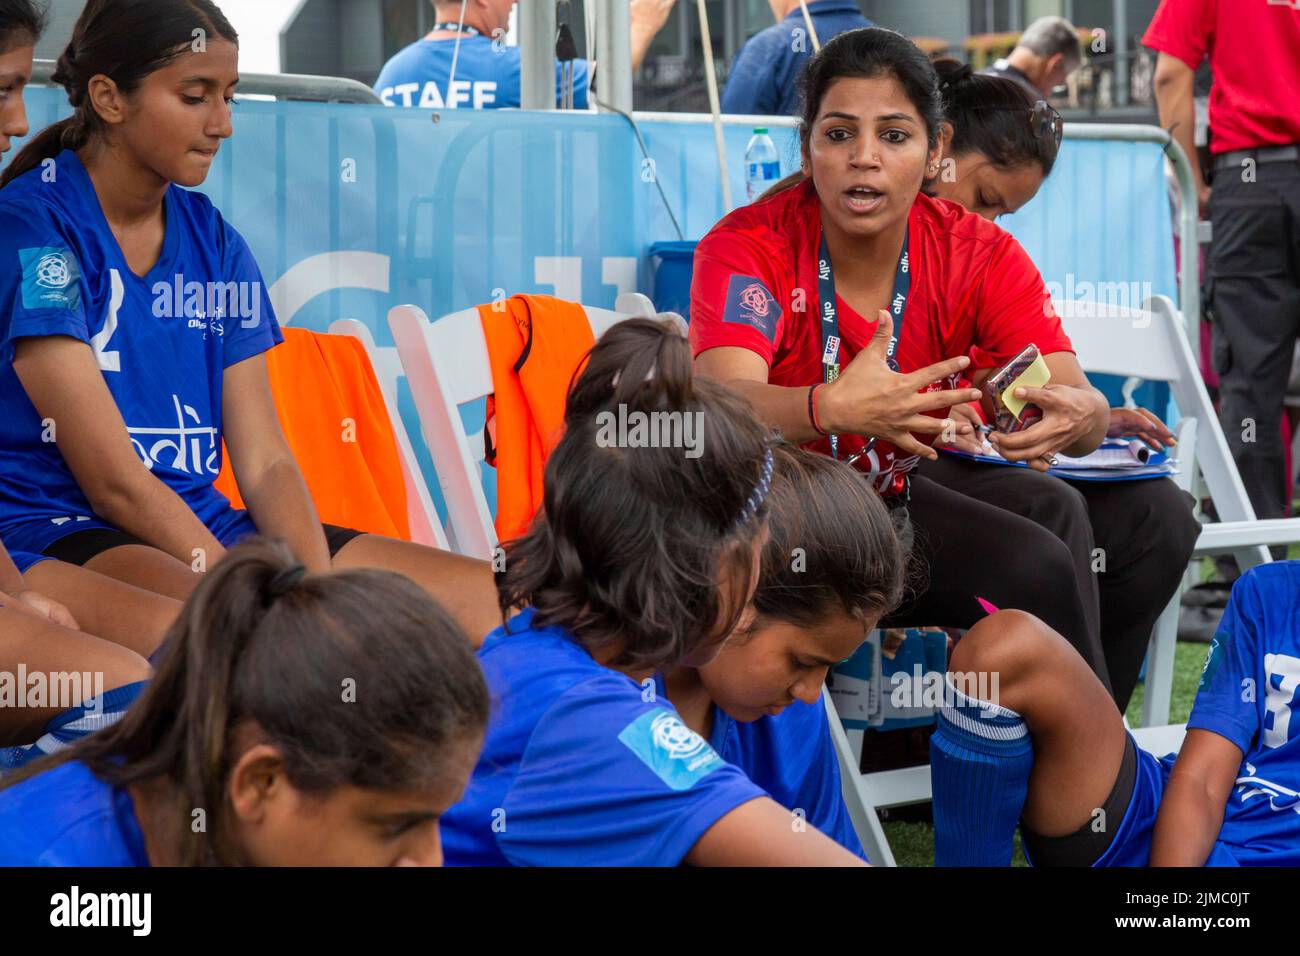 Detroit, Michigan - The women's teams of India and Namibia meet in the Special Olympics Unified Cup football (soccer) tournament. A coach talks to Ind Stock Photo